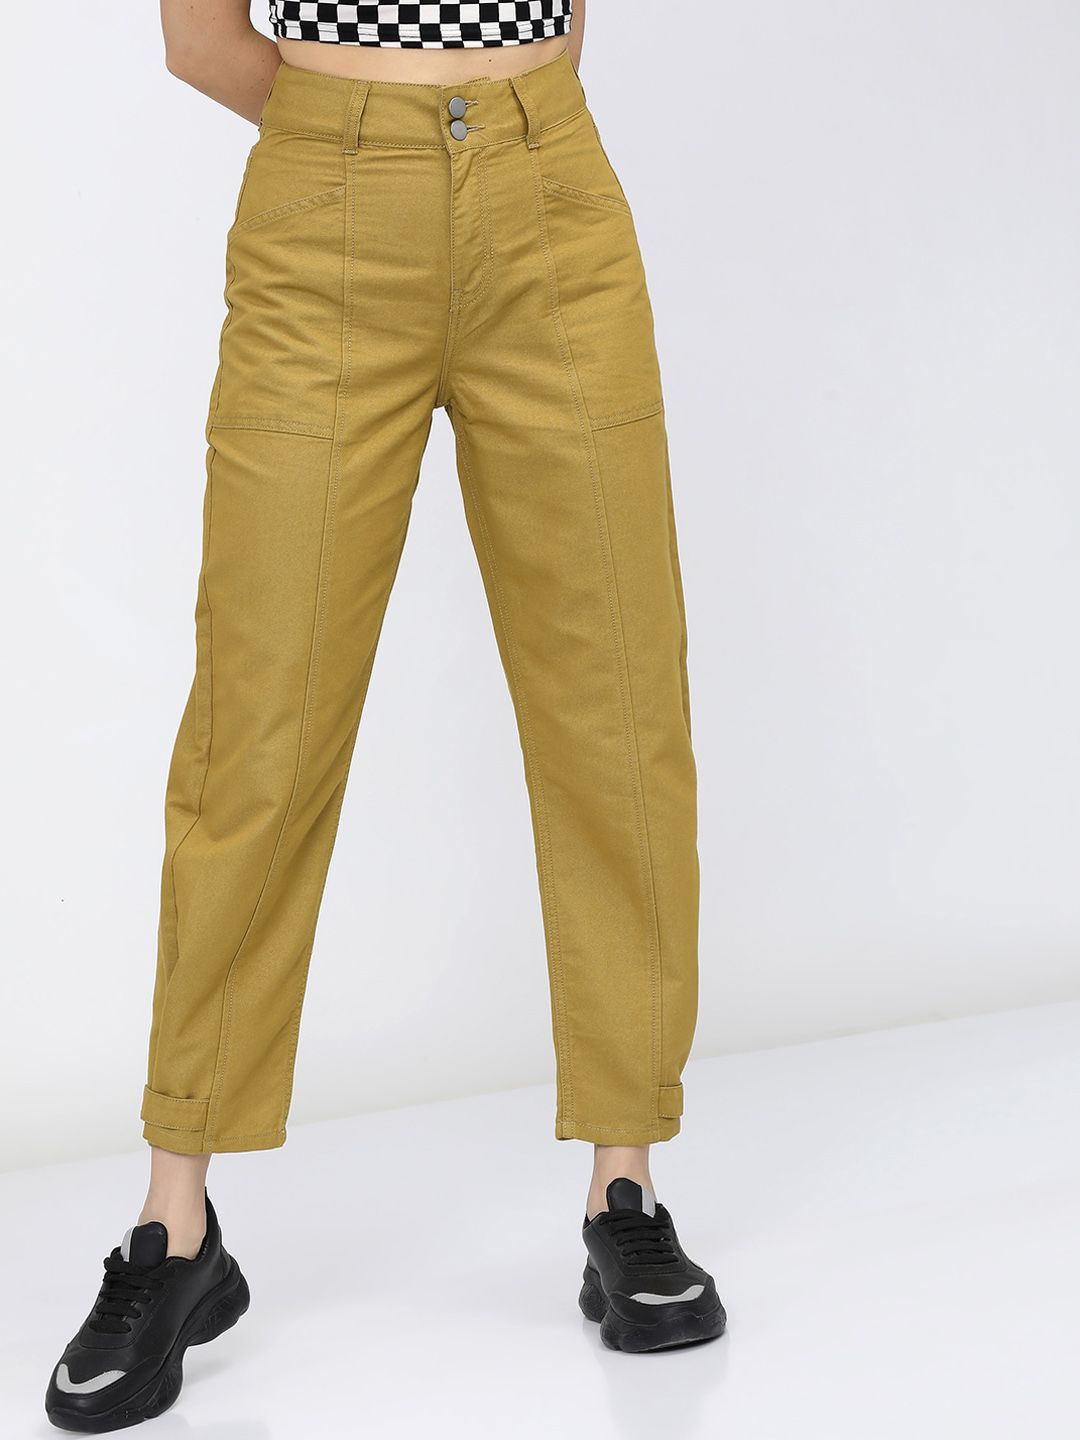 Tokyo Talkies Women Olive Green Stretchable Jeans Price in India